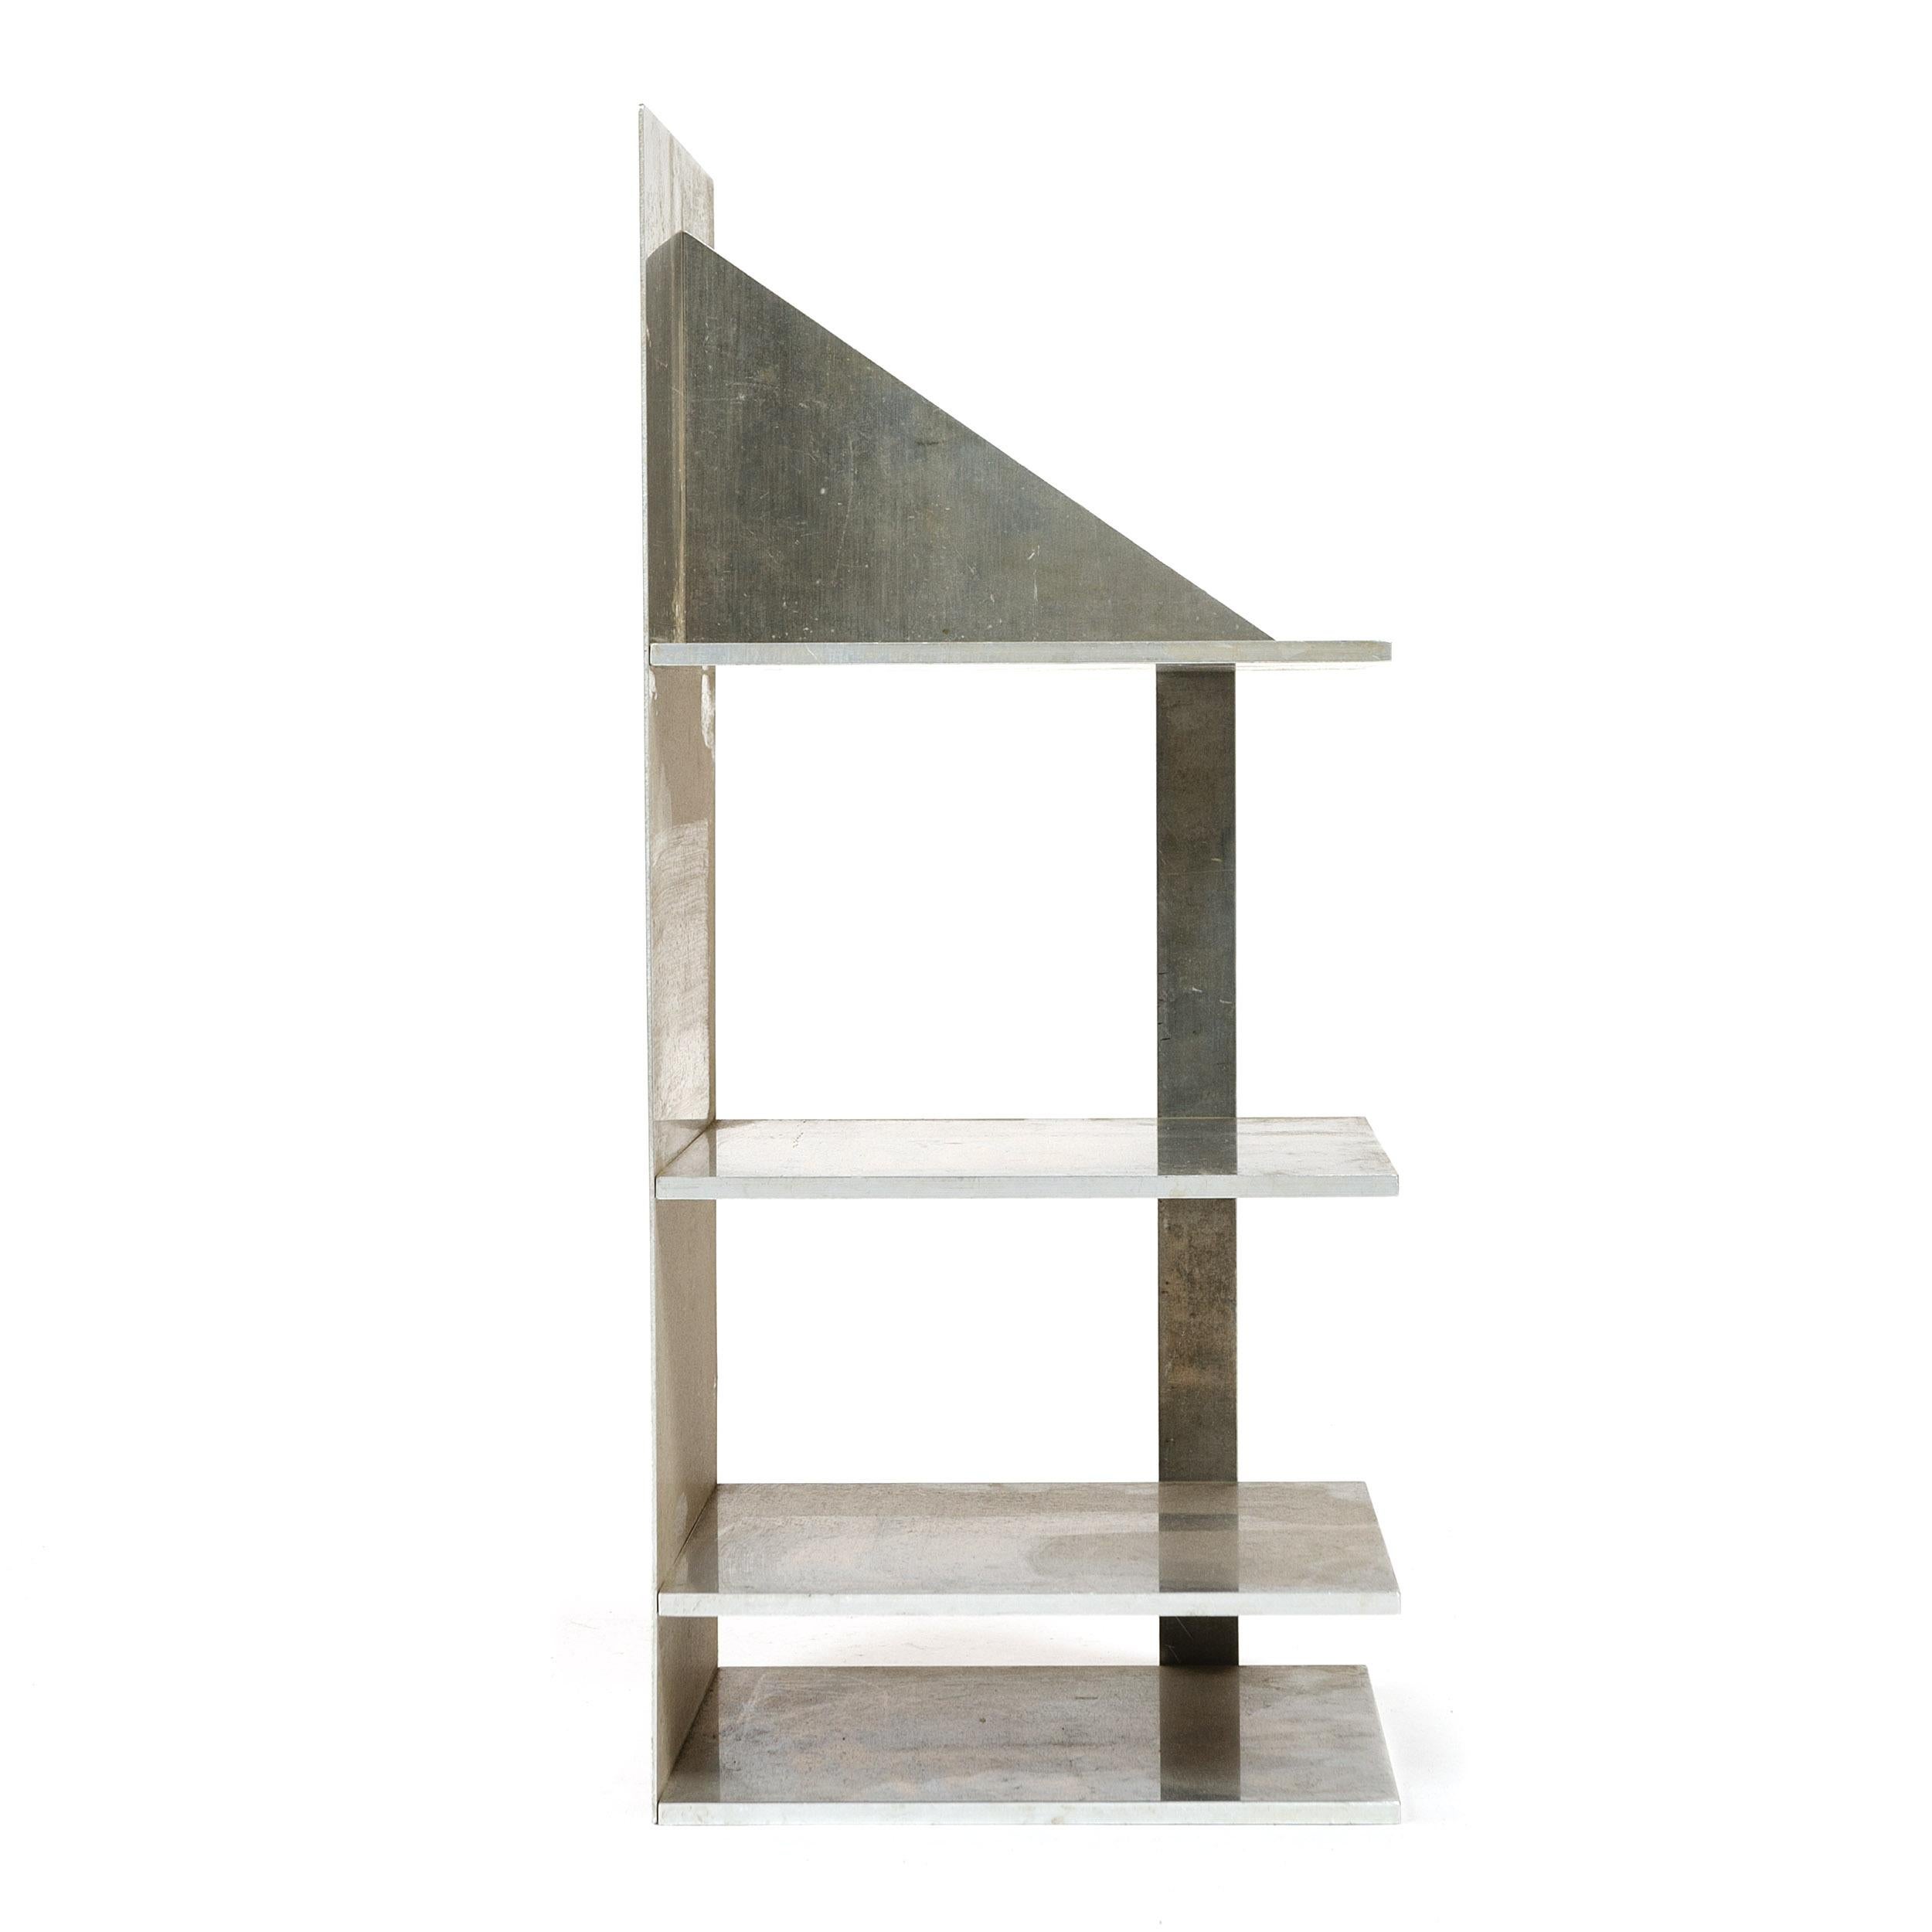 1950s Machined Aluminum Modernist Rack In Good Condition For Sale In Sagaponack, NY